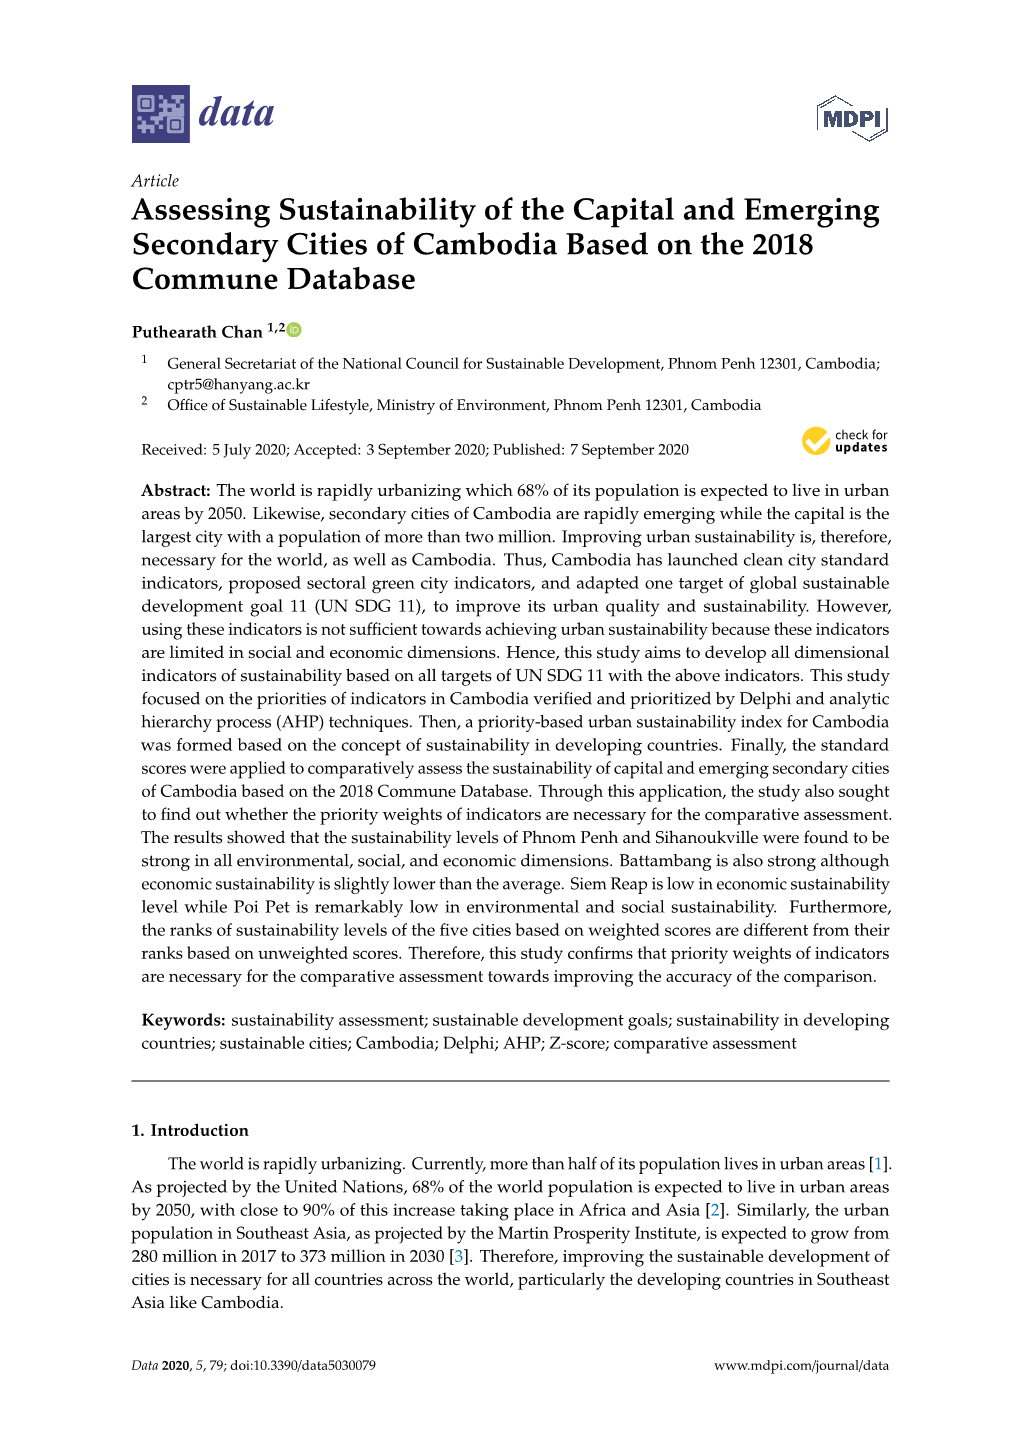 Assessing Sustainability of the Capital and Emerging Secondary Cities of Cambodia Based on the 2018 Commune Database